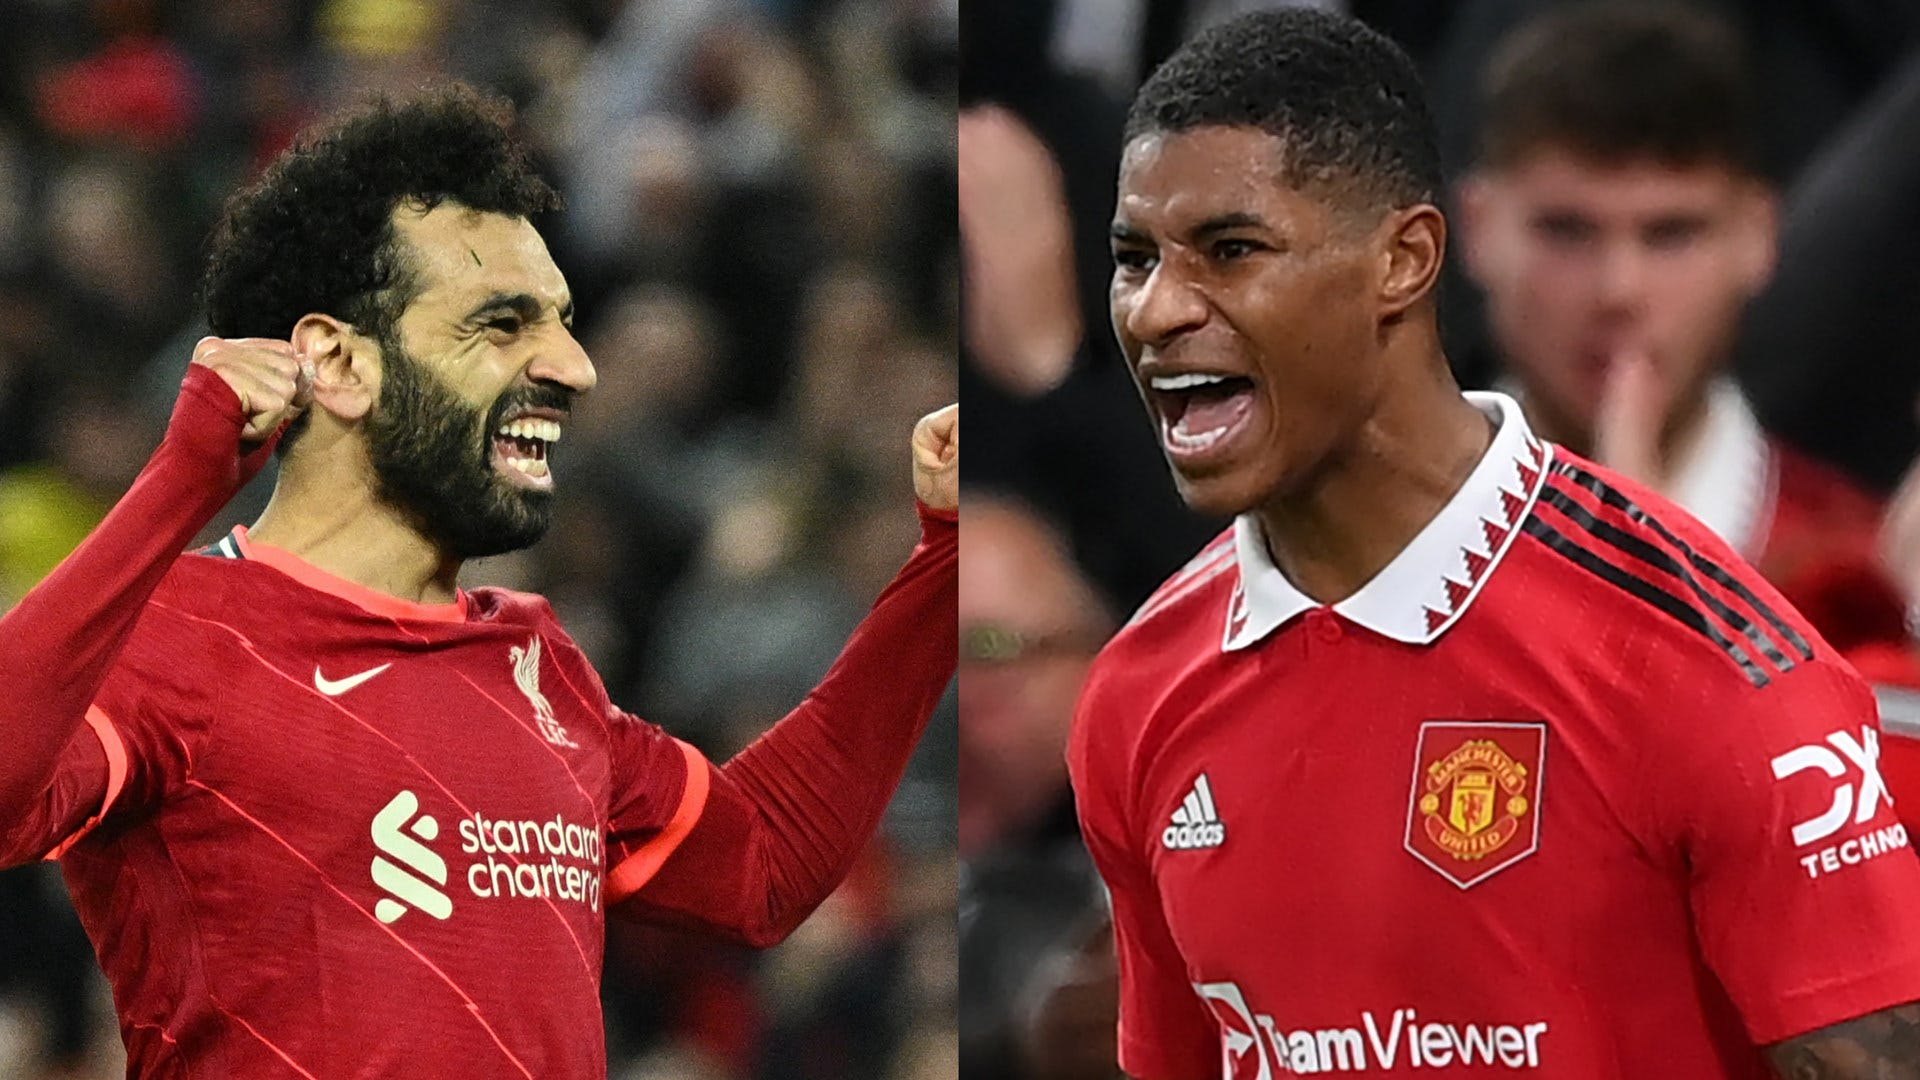 Liverpool vs Manchester United Live stream, TV channel, kick-off time and where to watch Goal